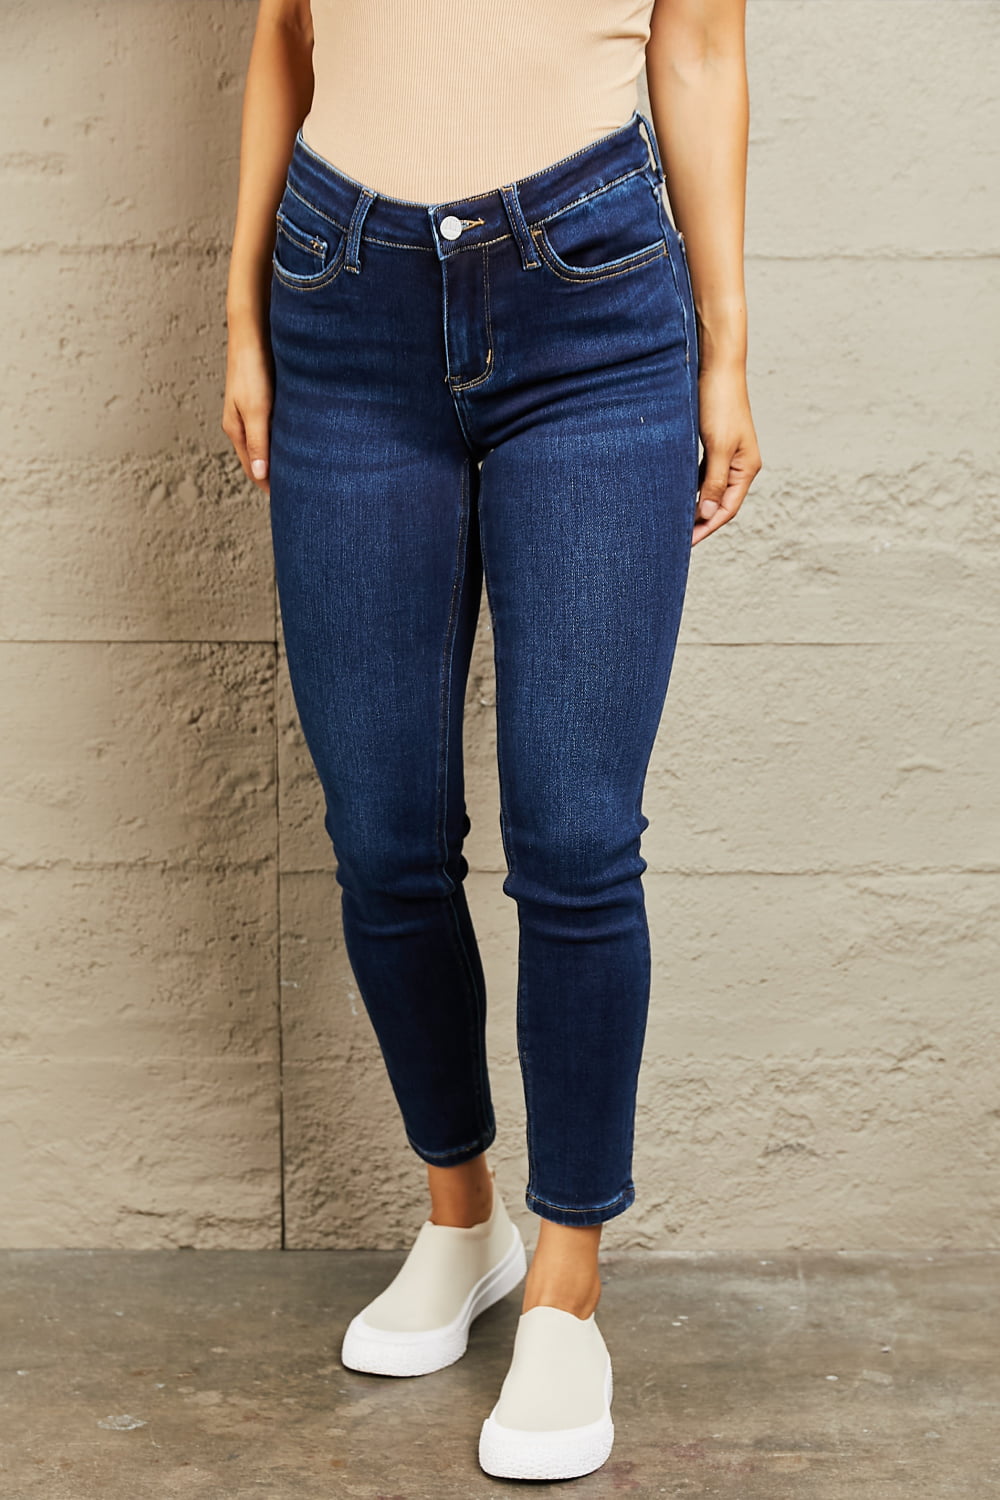 BAYEAS Mid Rise Slim Jeans - Jeans - FITGGINS